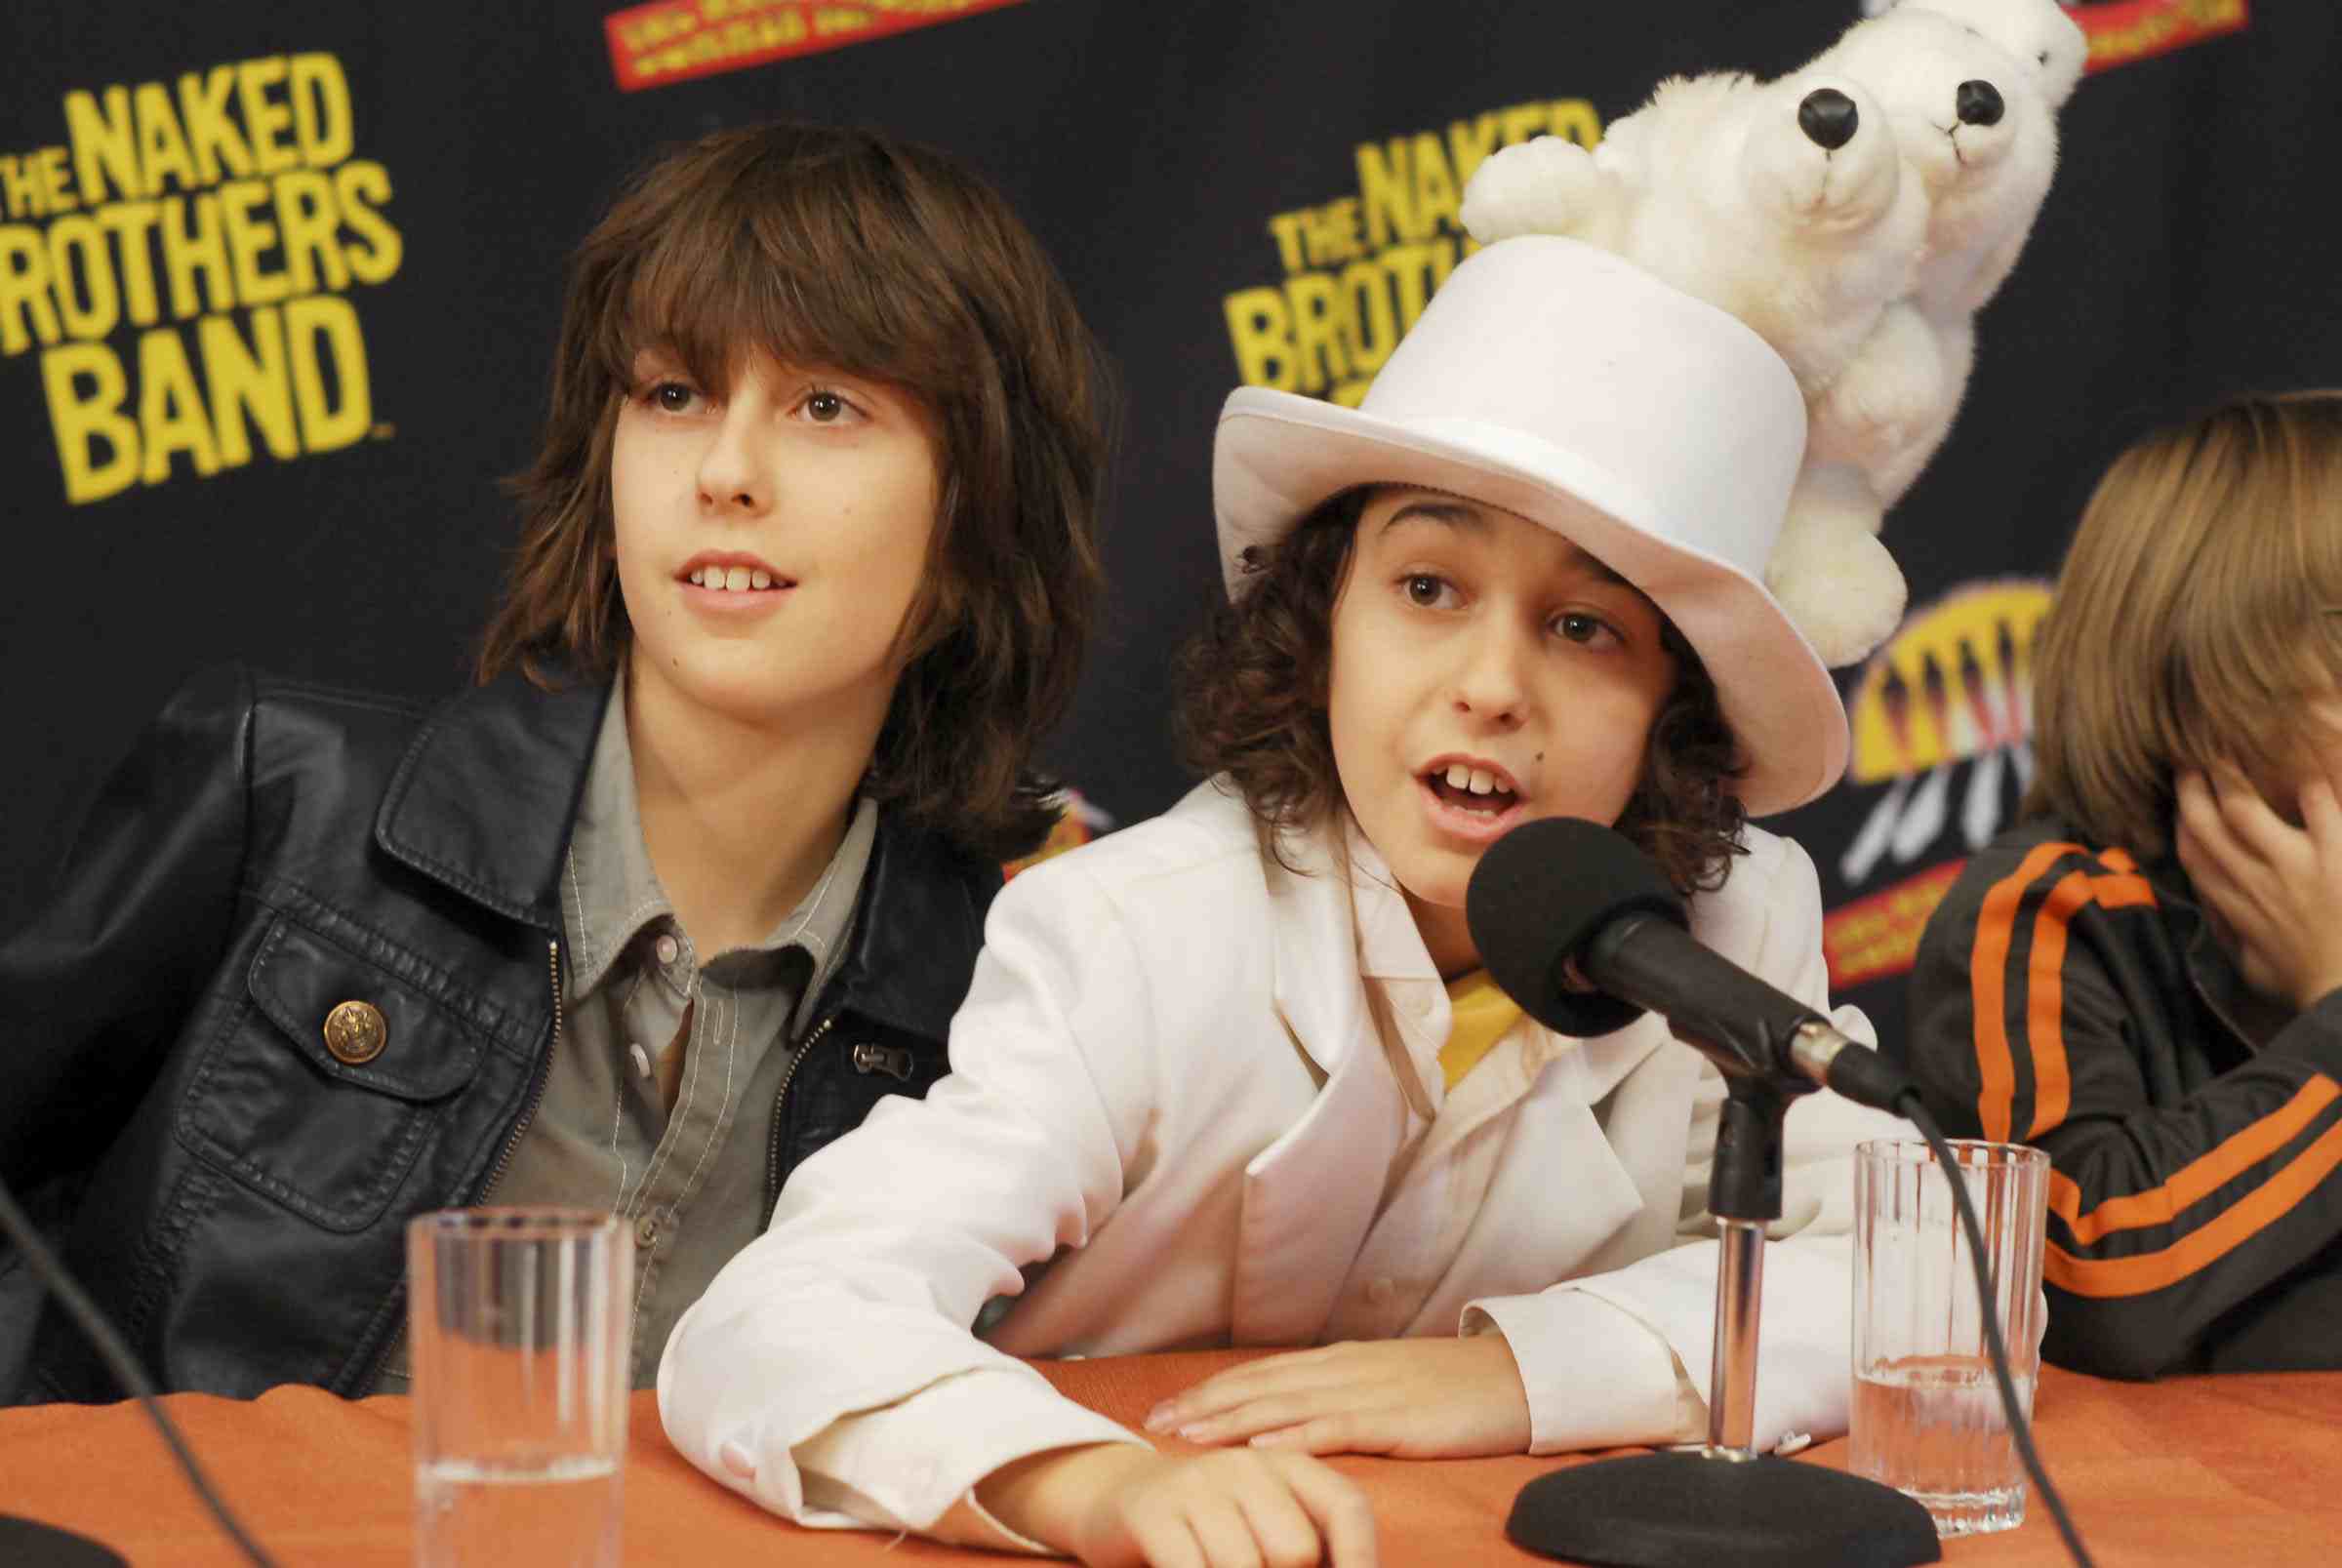 best of Orleans Naked new brothers band